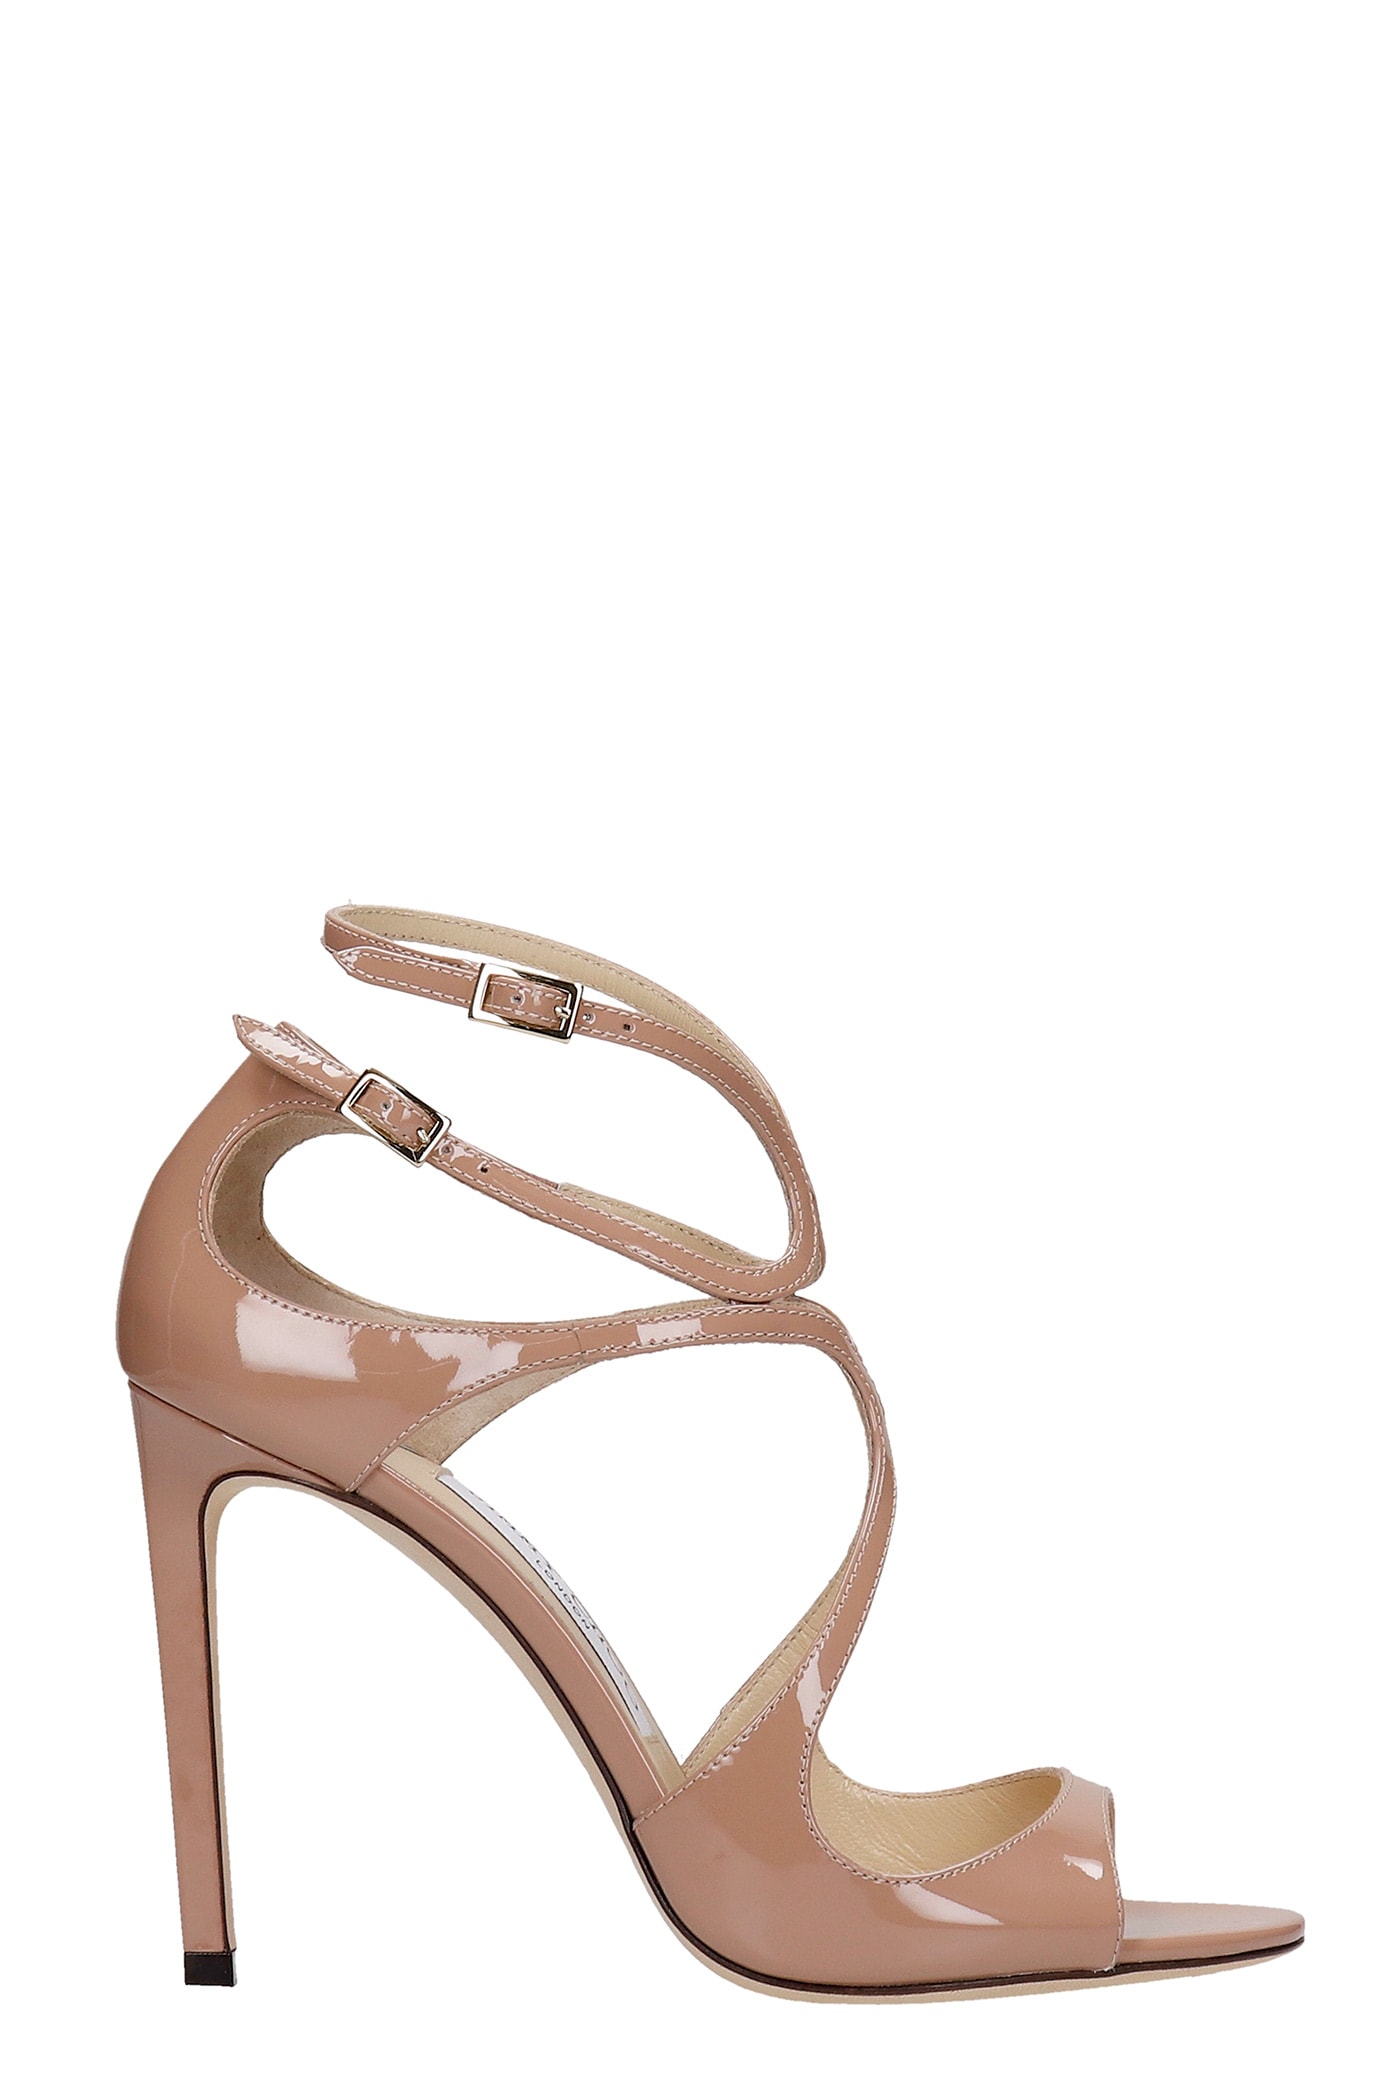 Jimmy Choo Lang Sandals In Powder Patent Leather